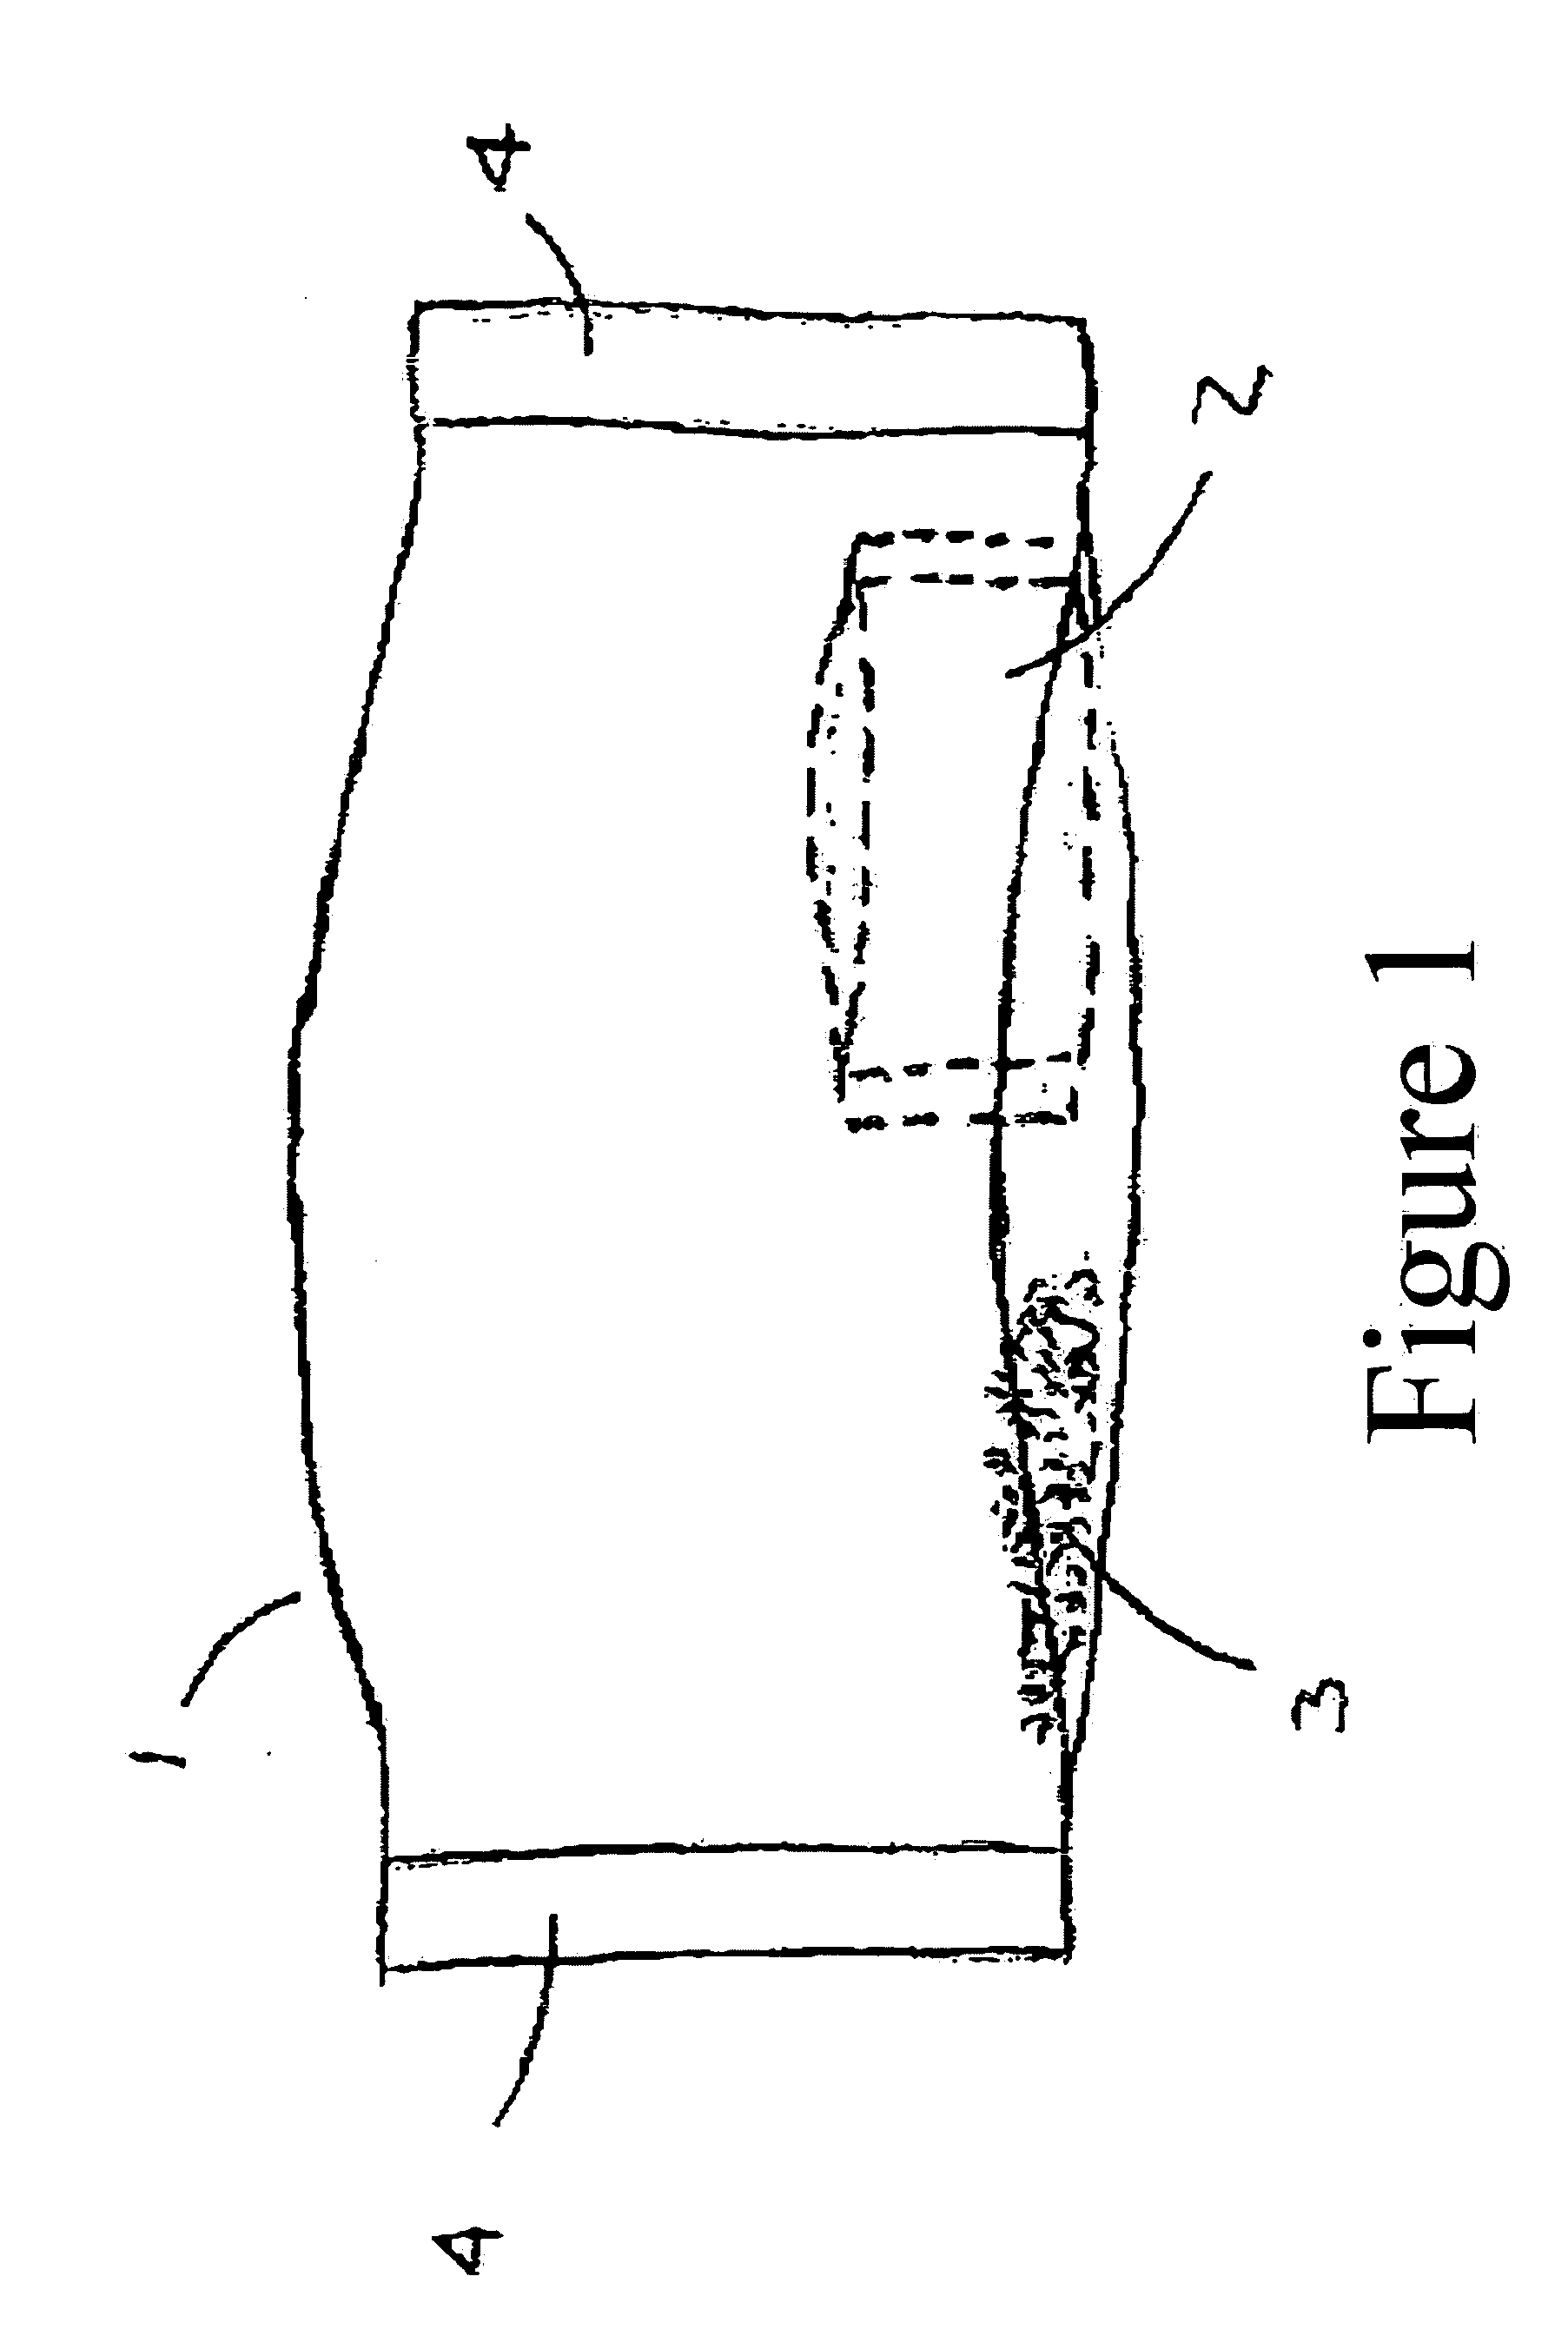 Gas-release packet with frangible sub-packet